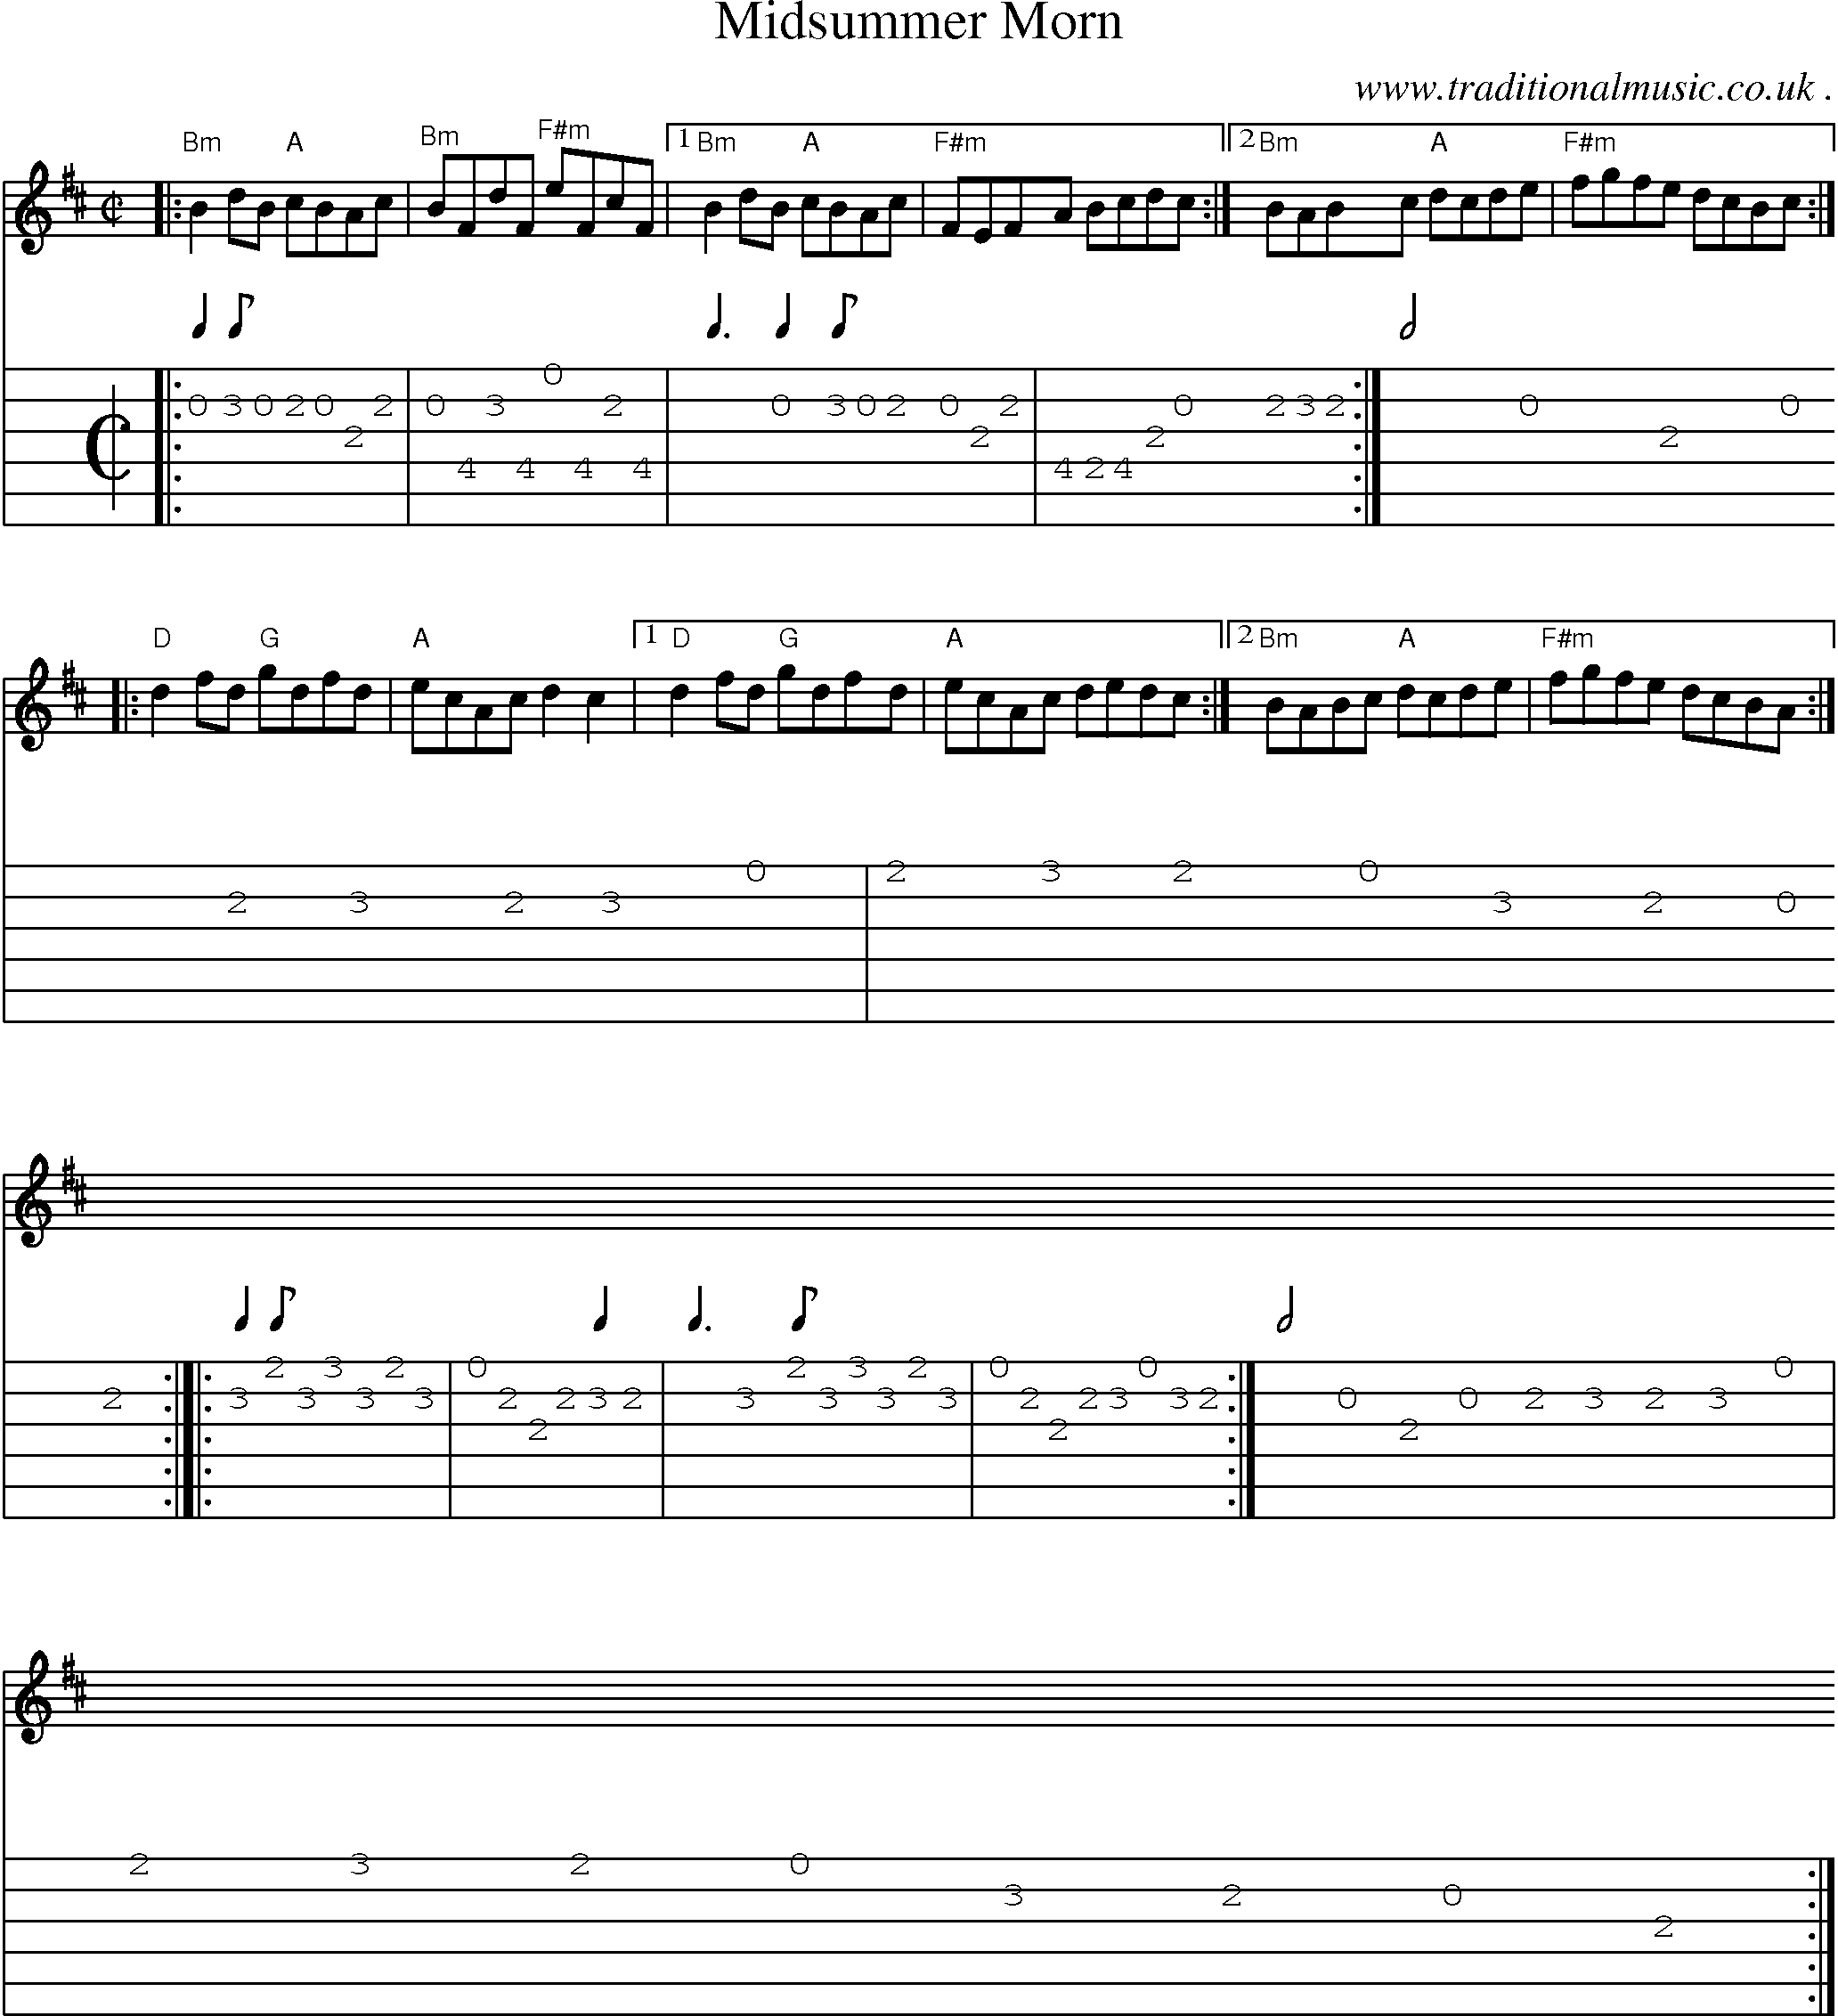 Sheet-music  score, Chords and Guitar Tabs for Midsummer Morn